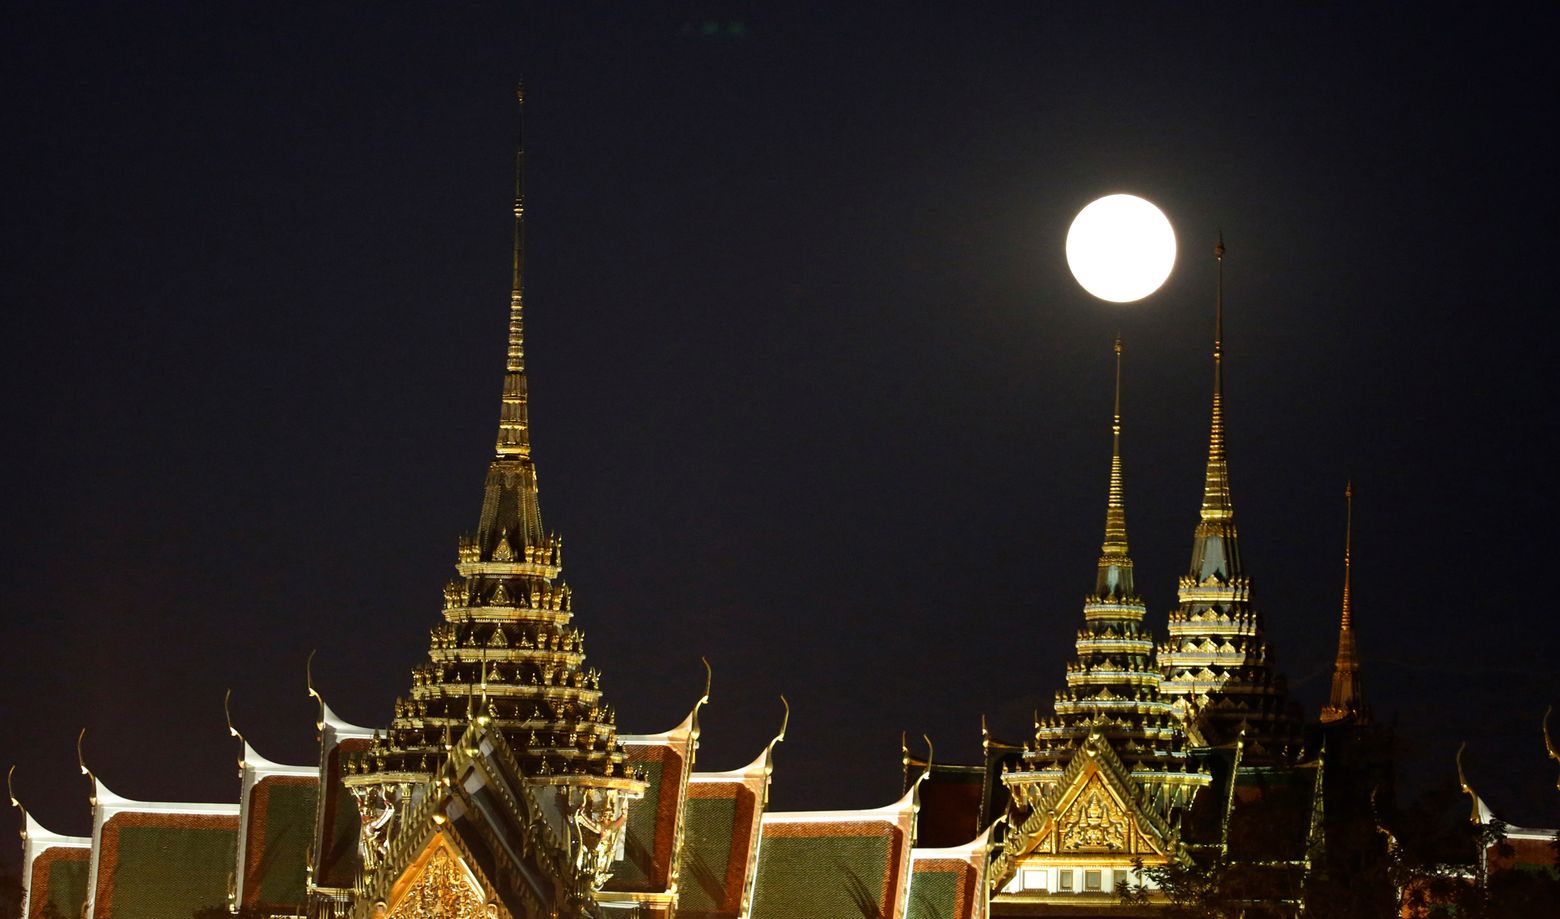 The moon rises over the Grand Palace in Bangkok, Thailand Monday, Nov. 14, 2016. The brightest moon in almost 69 years lights up the sky on Monday in a treat for star watchers around the globe. (AP Photo/Sakchai Lalit)